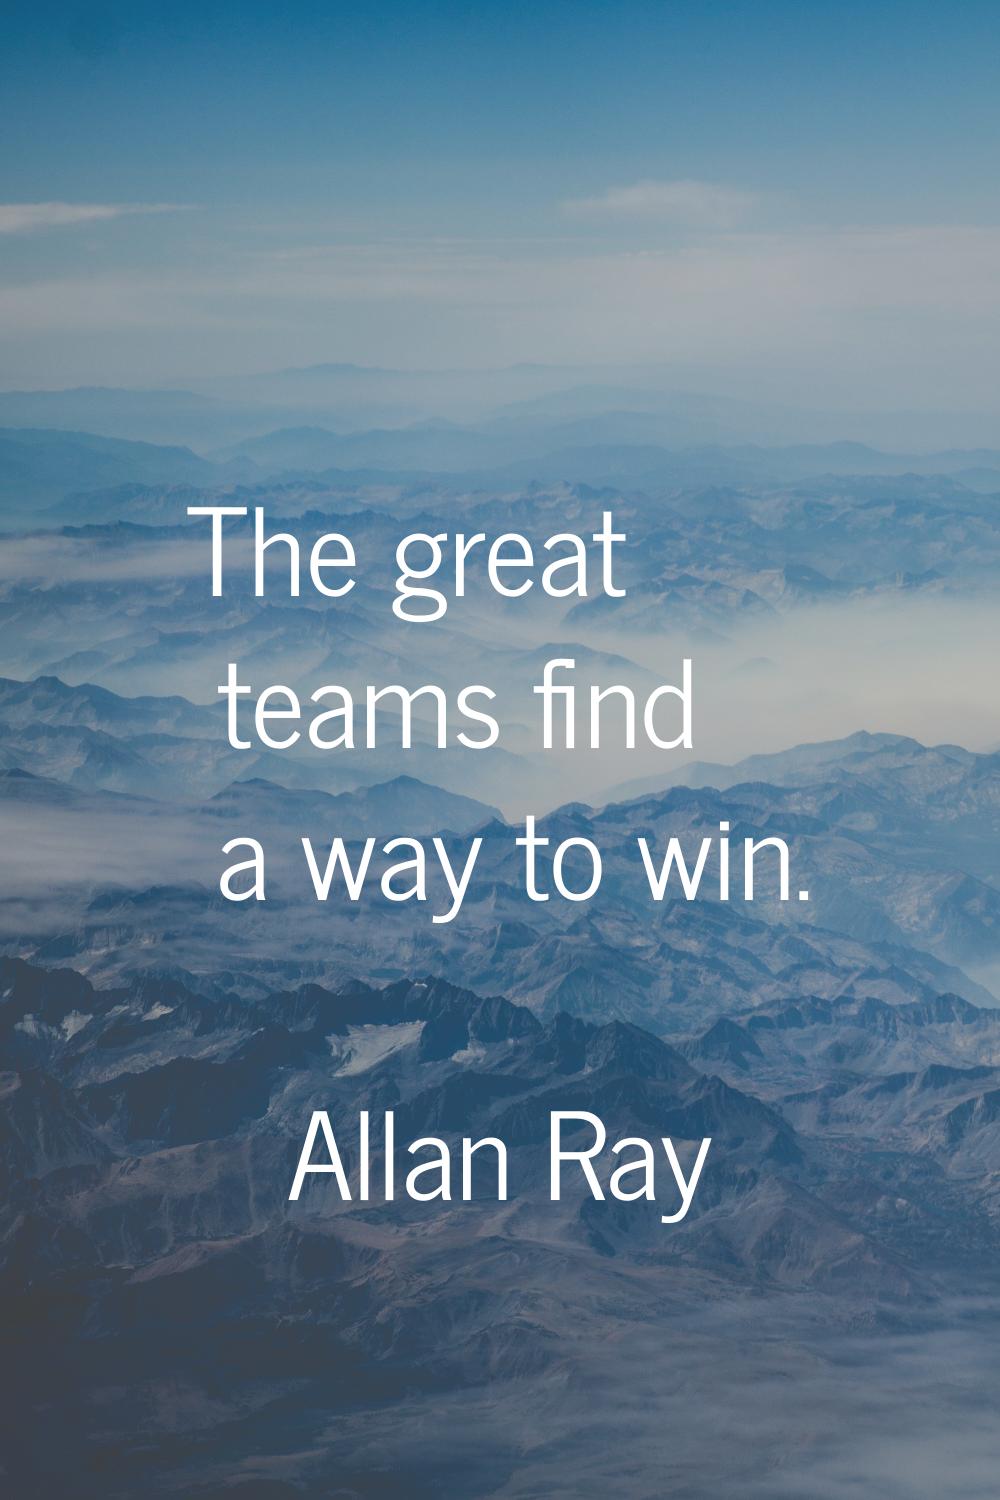 The great teams find a way to win.